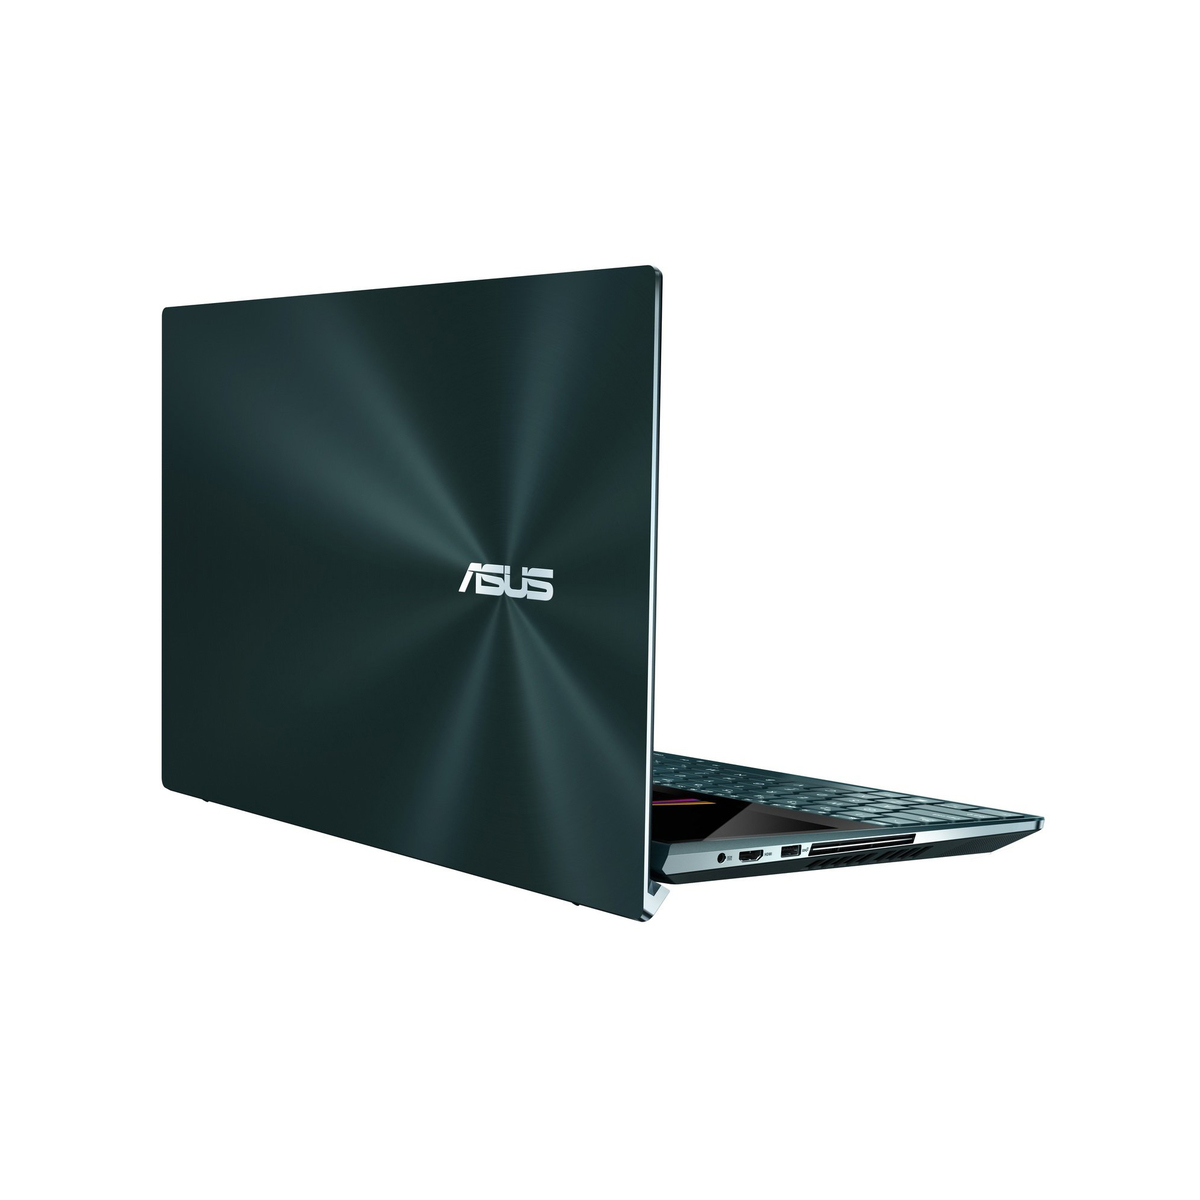 Asus ZenBook Pro Duo UX581GV-H2001TS Laptop (Celestial Blue)- Intel i9-9980HK 5.0 GHz, 32GB RAM, 1TB SSD, Nvidia GeForce RTX 2060(6GB GDDR6), 15.6 inches 4K UHD OLED Touch, Windows 10